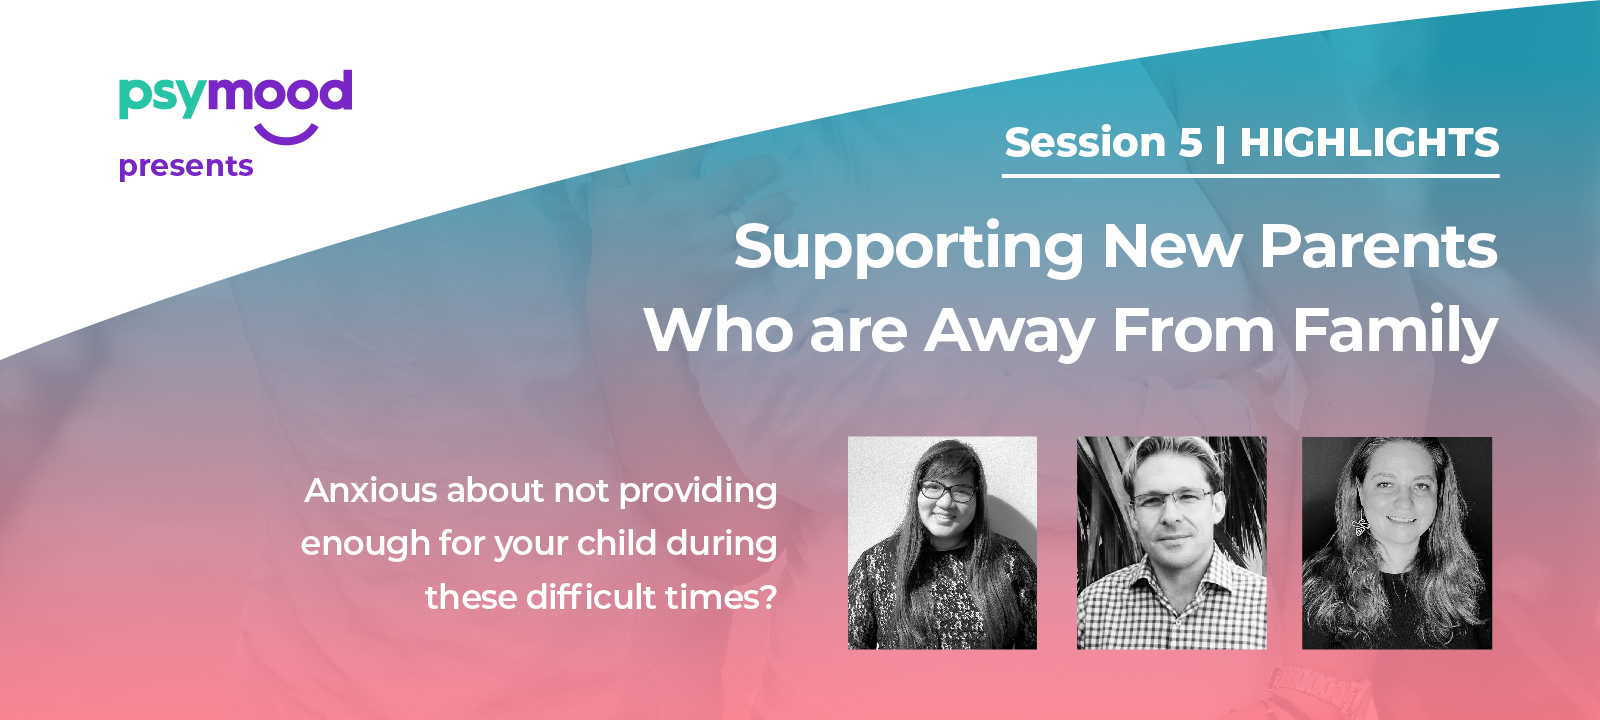 Supporting New Parents Who are Away from Family Webinar Highlights